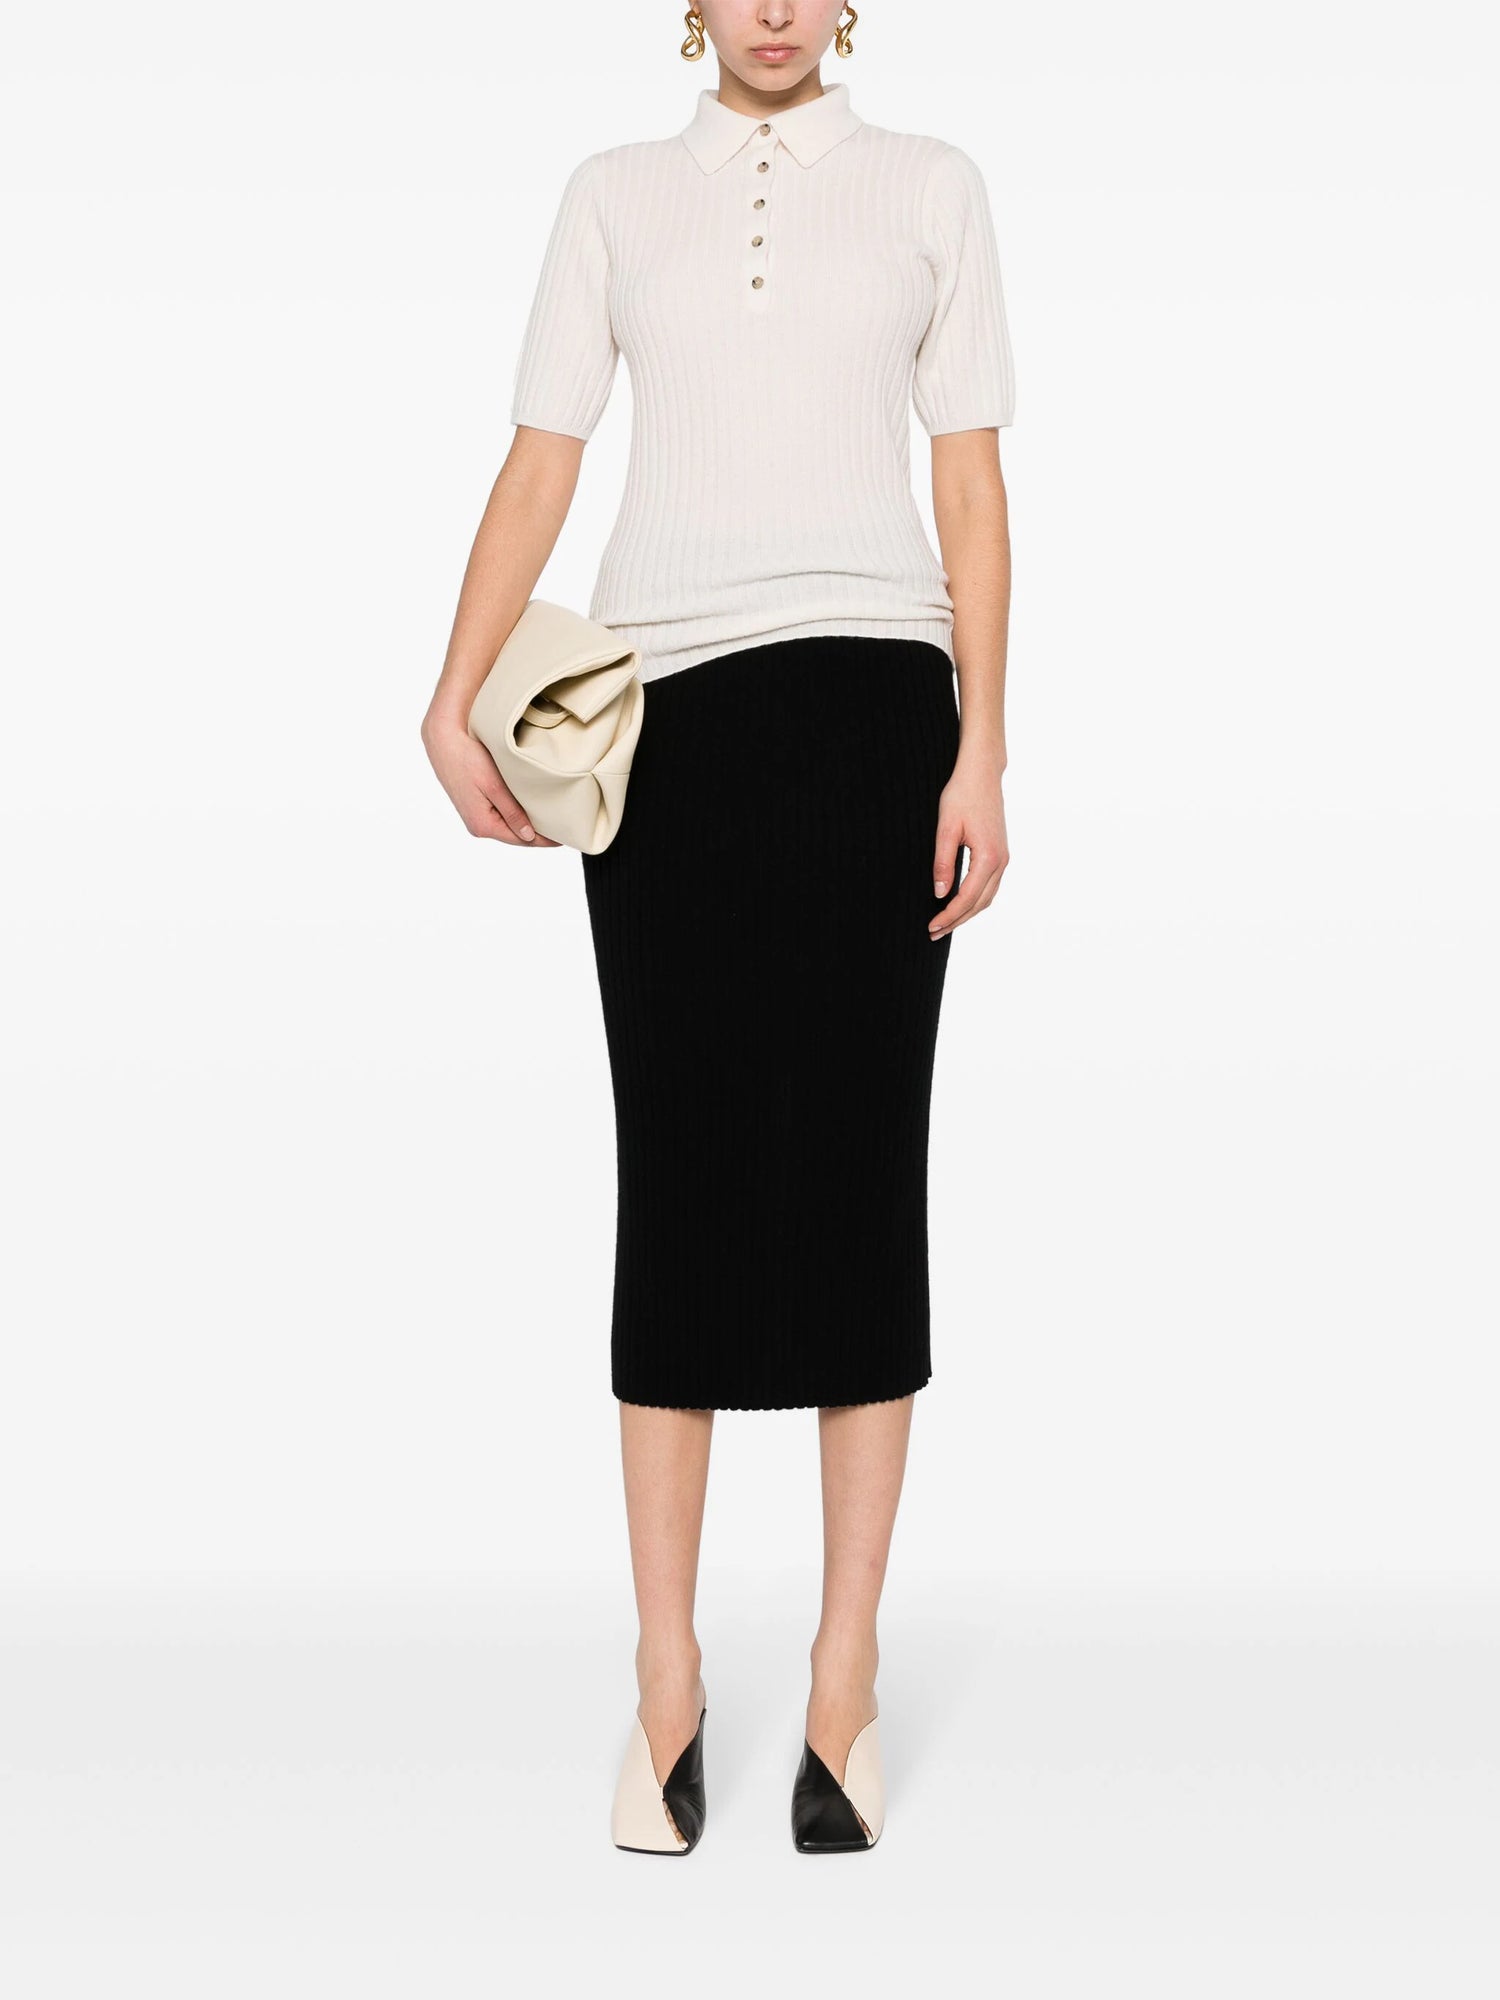 Poloneck cashmere sweater, ivory